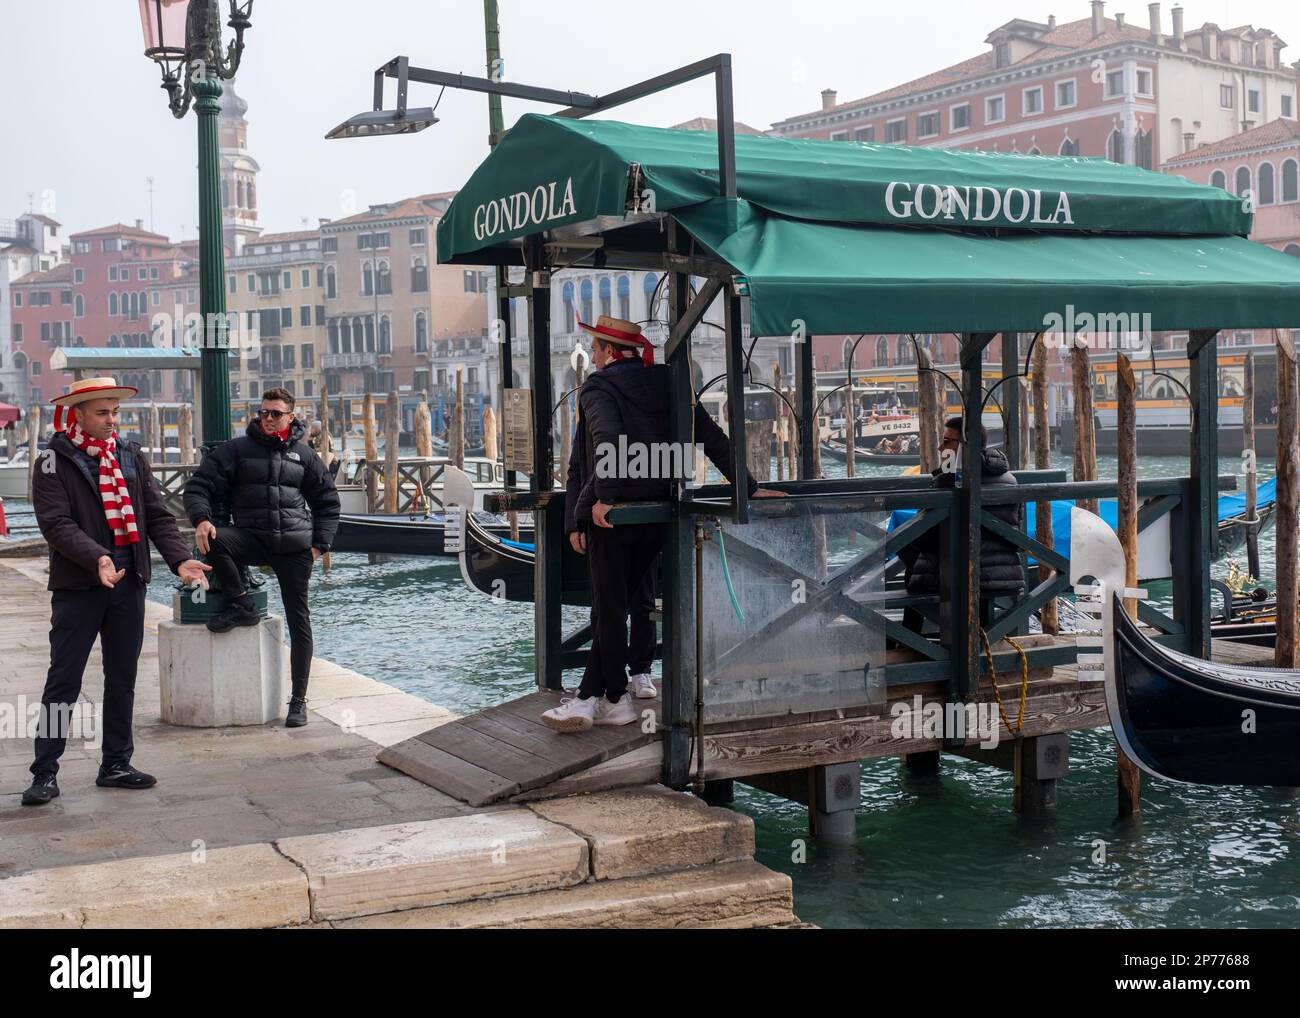 Gondoliers at San Silvestro chat before starting work on the Grand Canal, Venice, Italy. Stock Photo